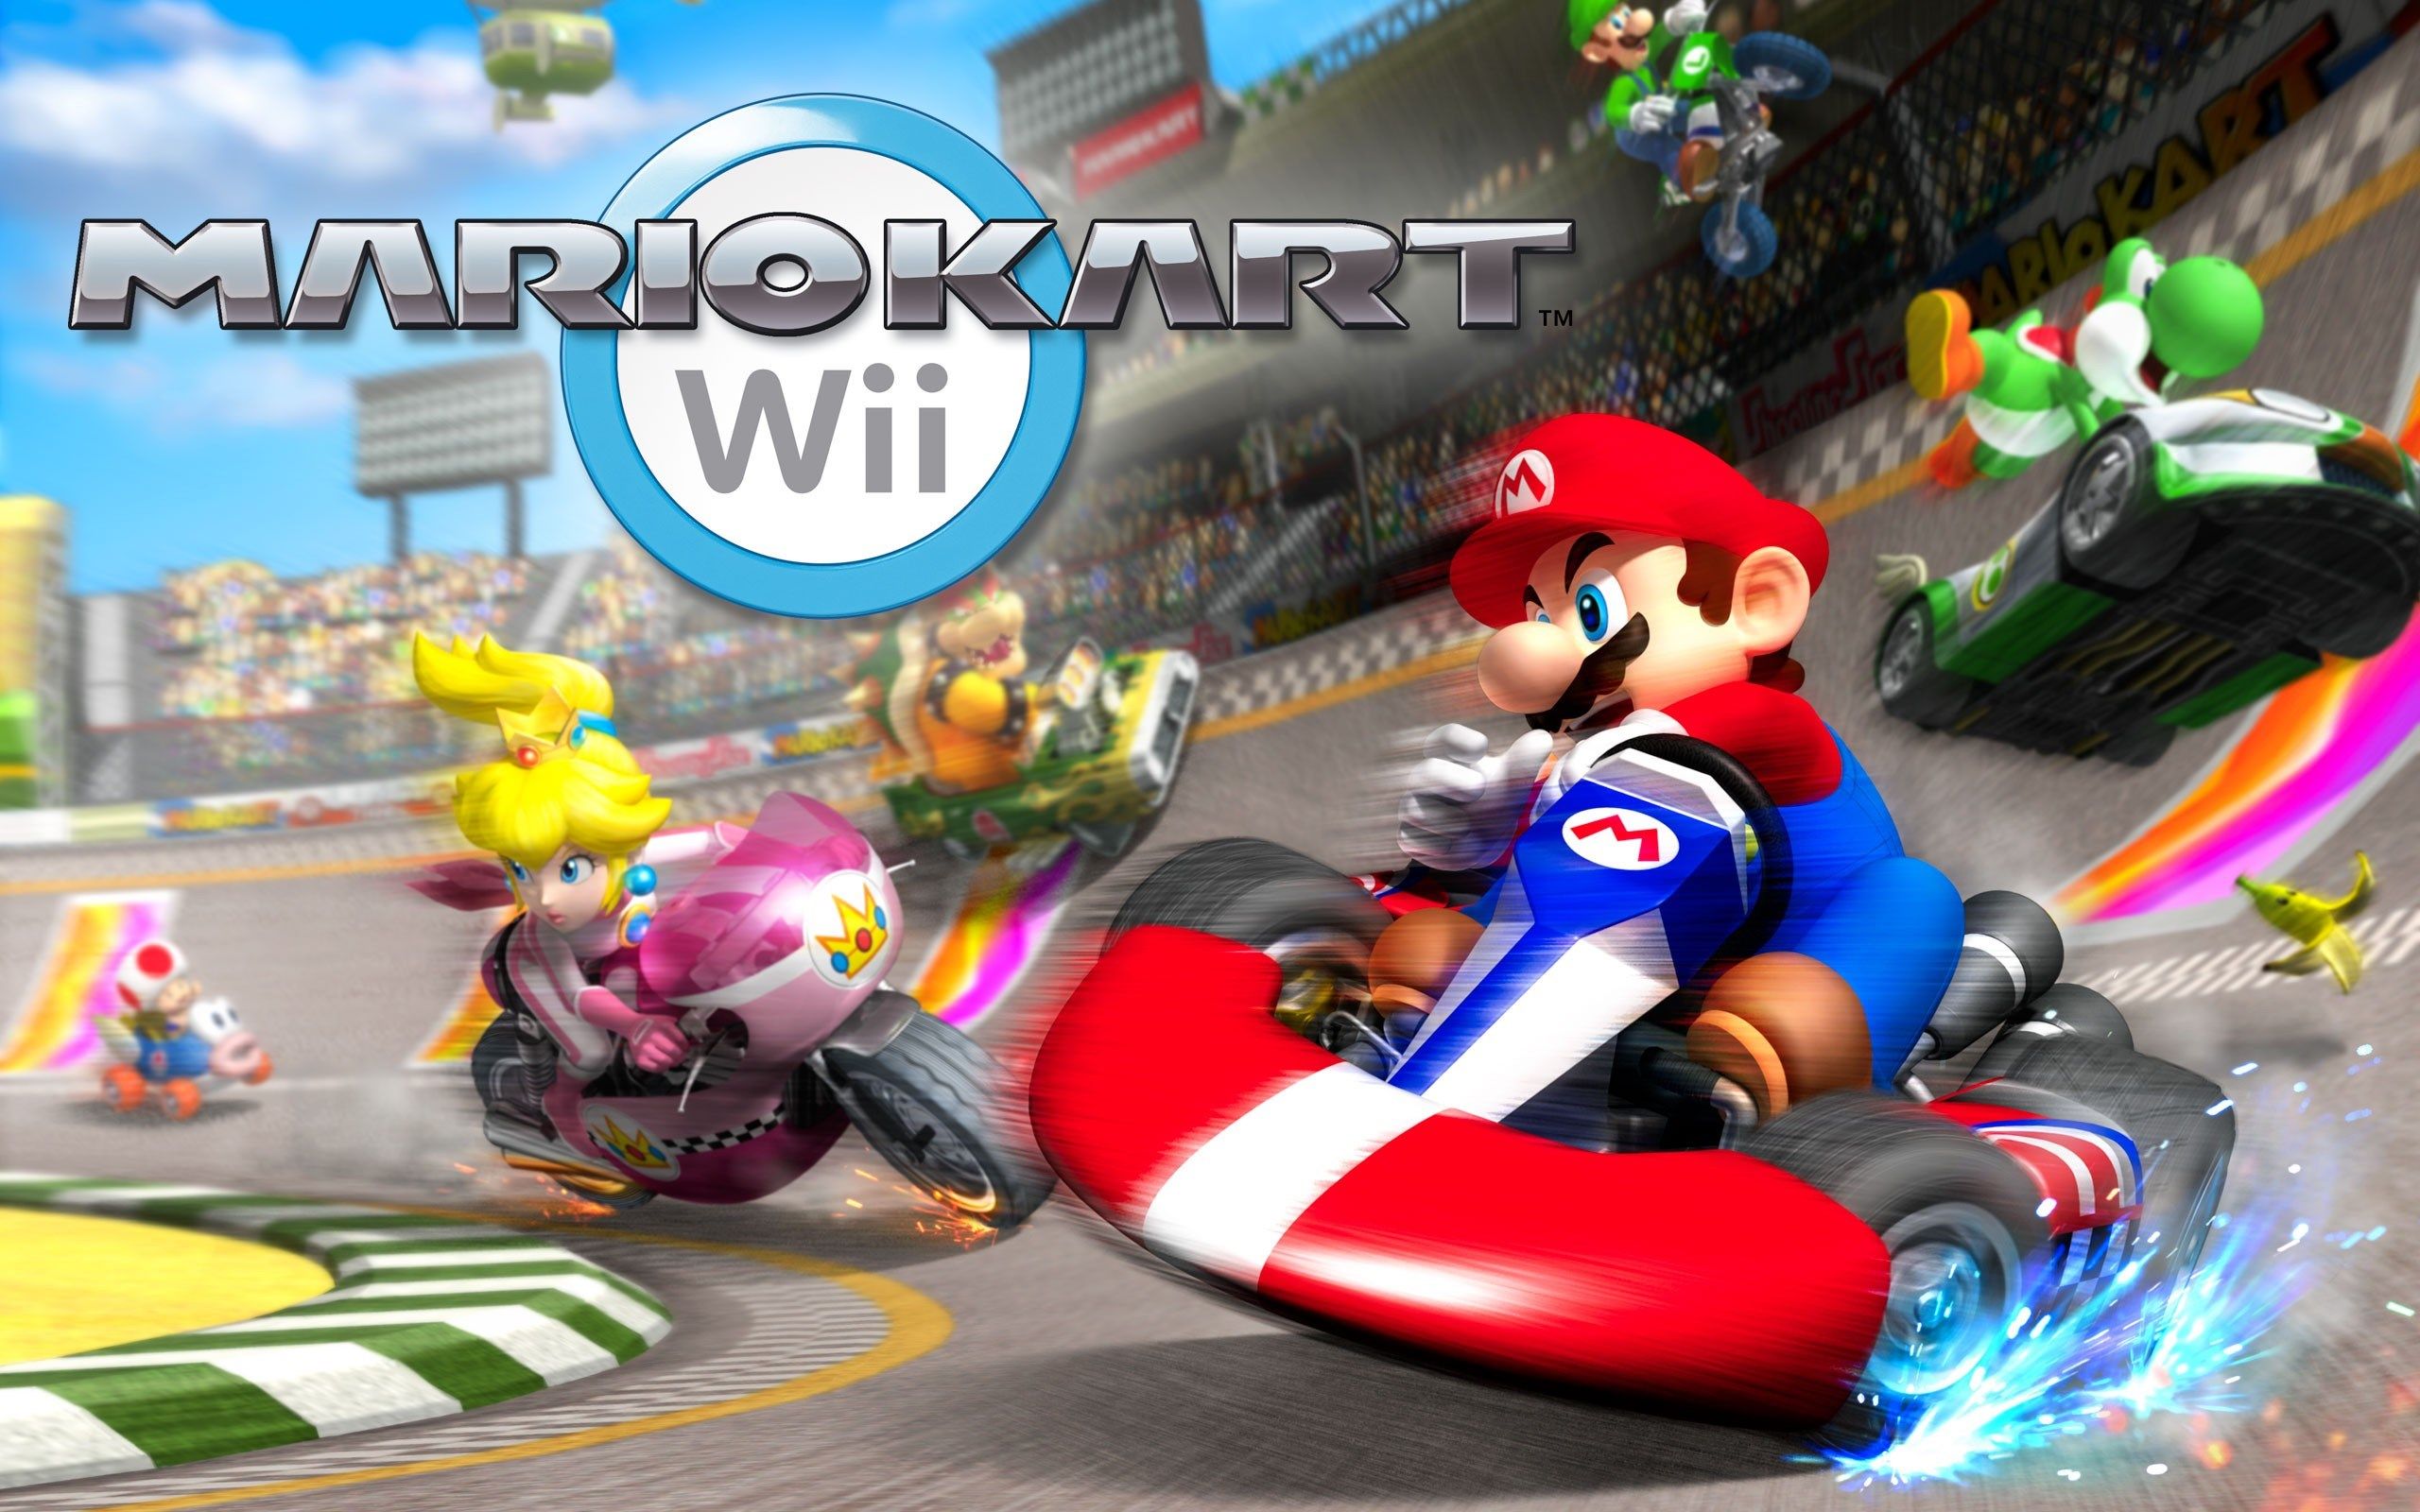 Mario kart wii download for pc